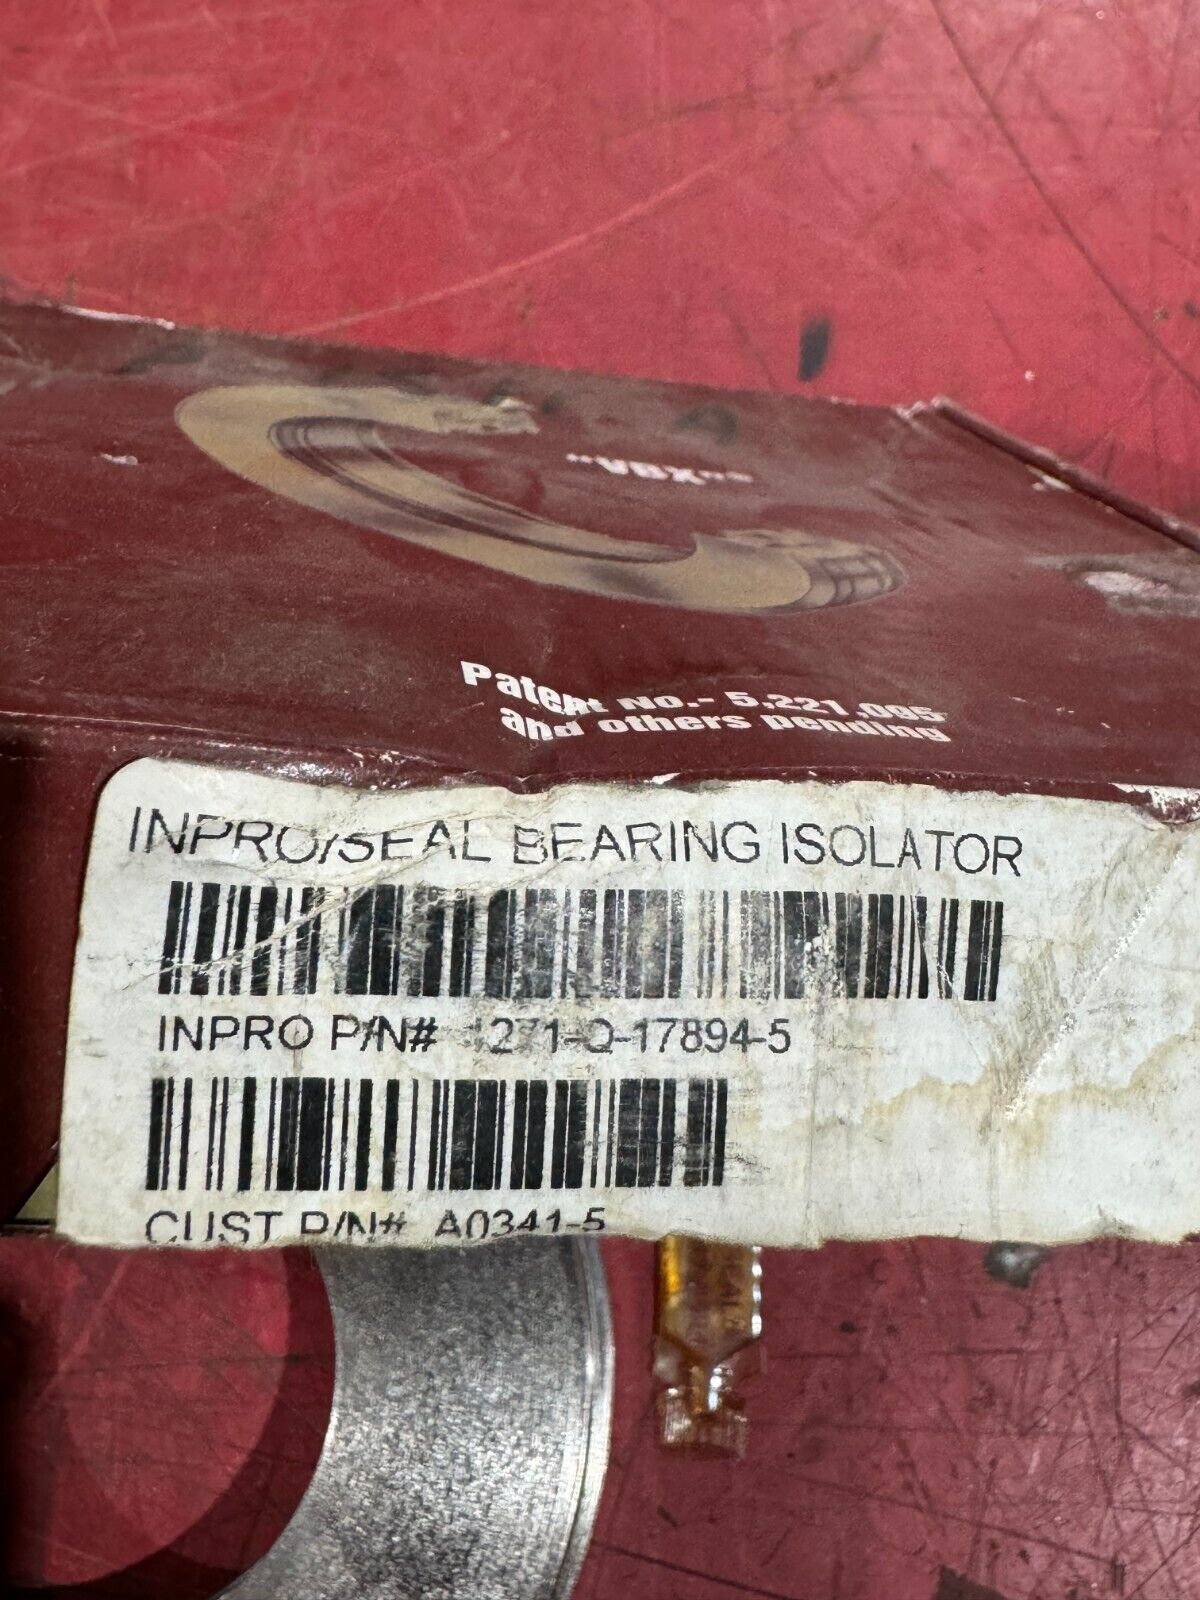 NEW IN BOX INPRO/SEAL BEARING ISOLATOR 1271-Q-17894-5 A0341-5